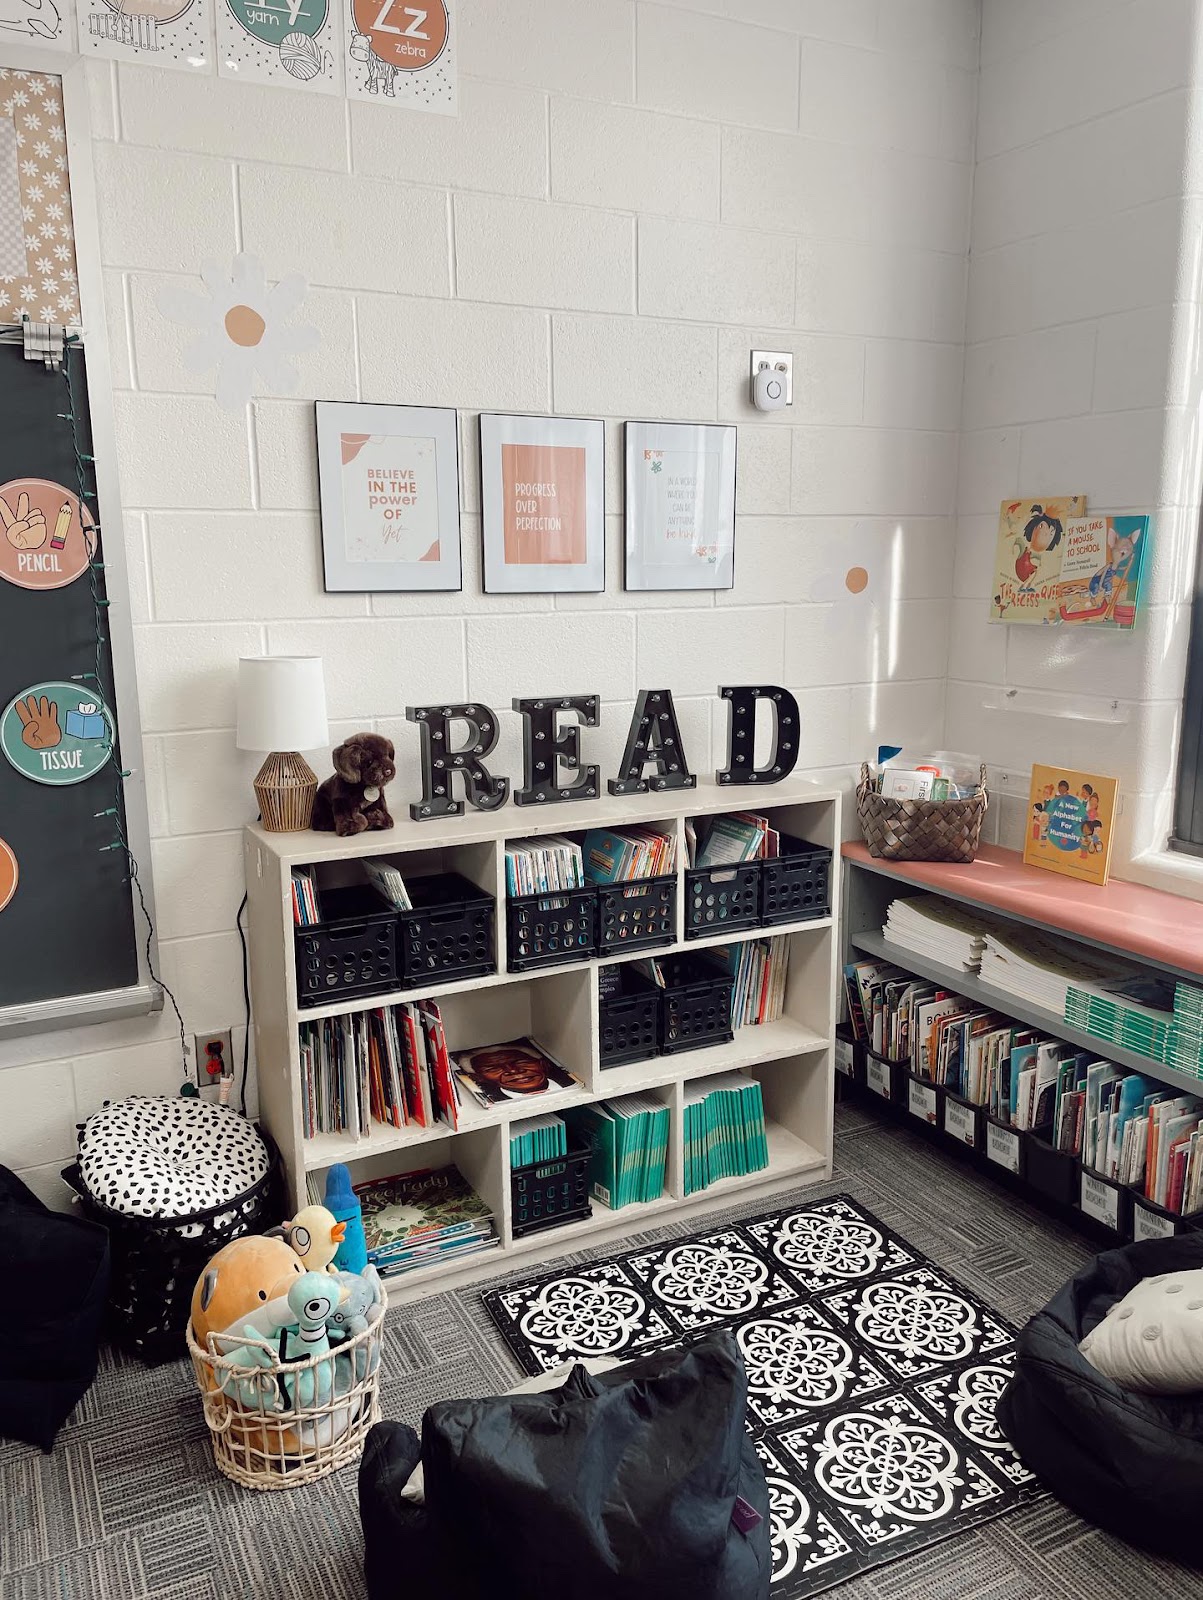 This image shows a reading corner in a classroom with bean bag chairs, a rug, and a basket of stuffed animals. 